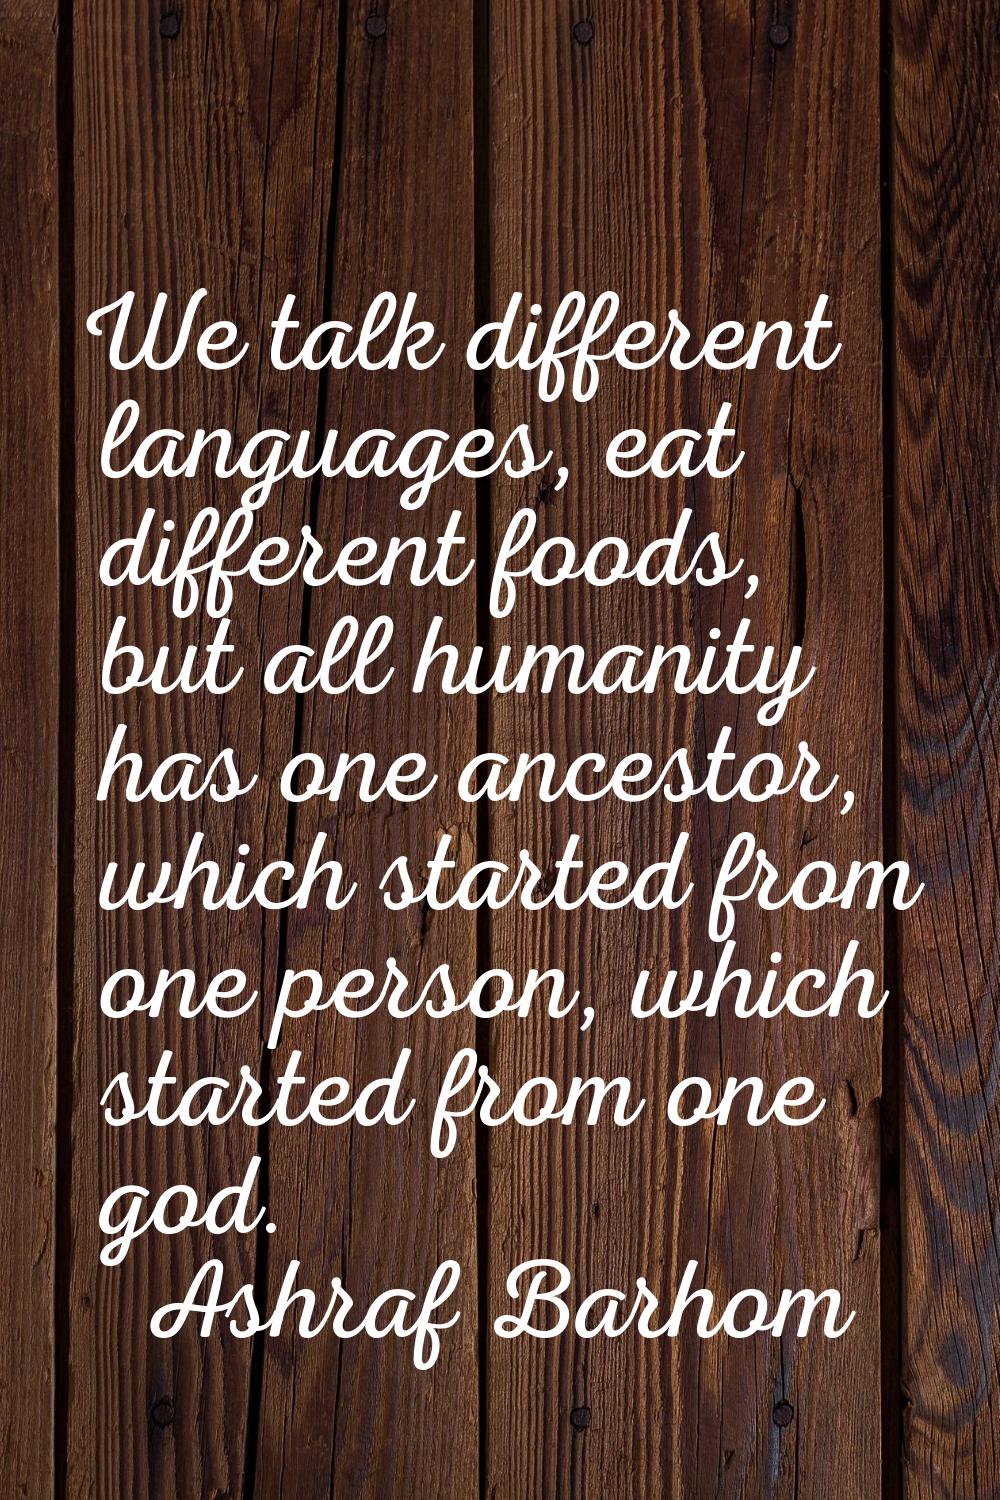 We talk different languages, eat different foods, but all humanity has one ancestor, which started 